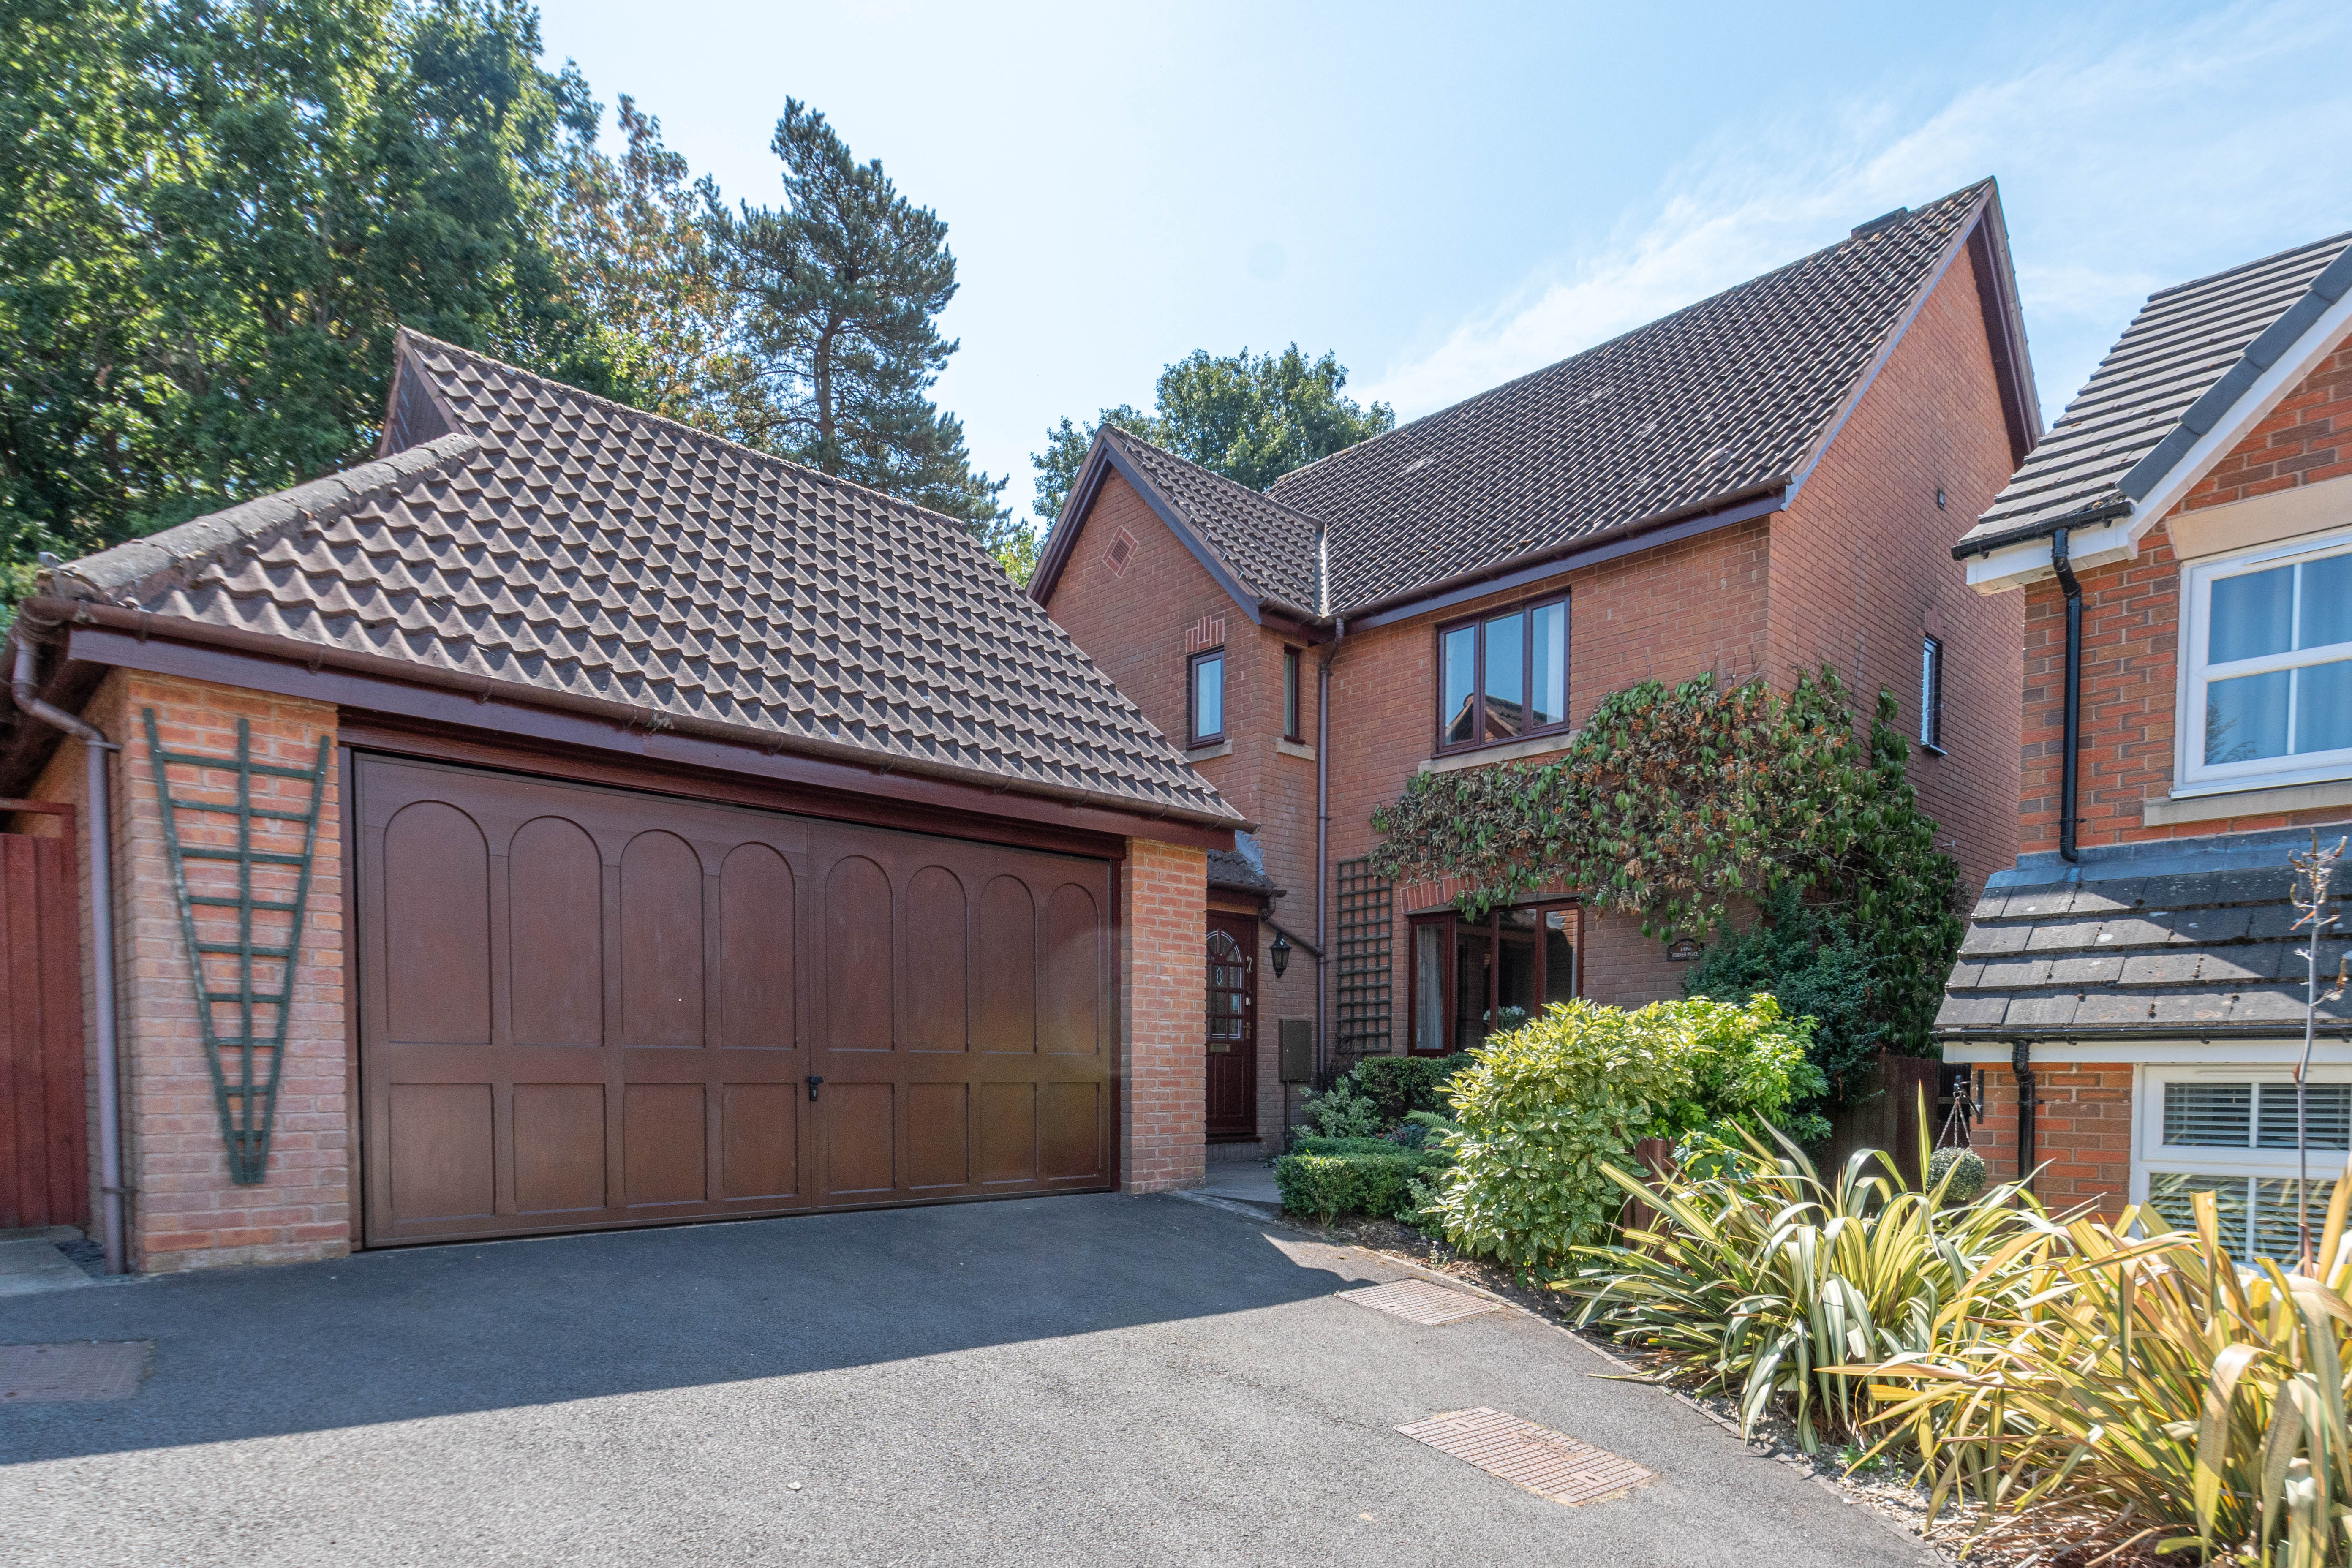 4 bed house for sale in Foxholes Lane, Callow Hill 1